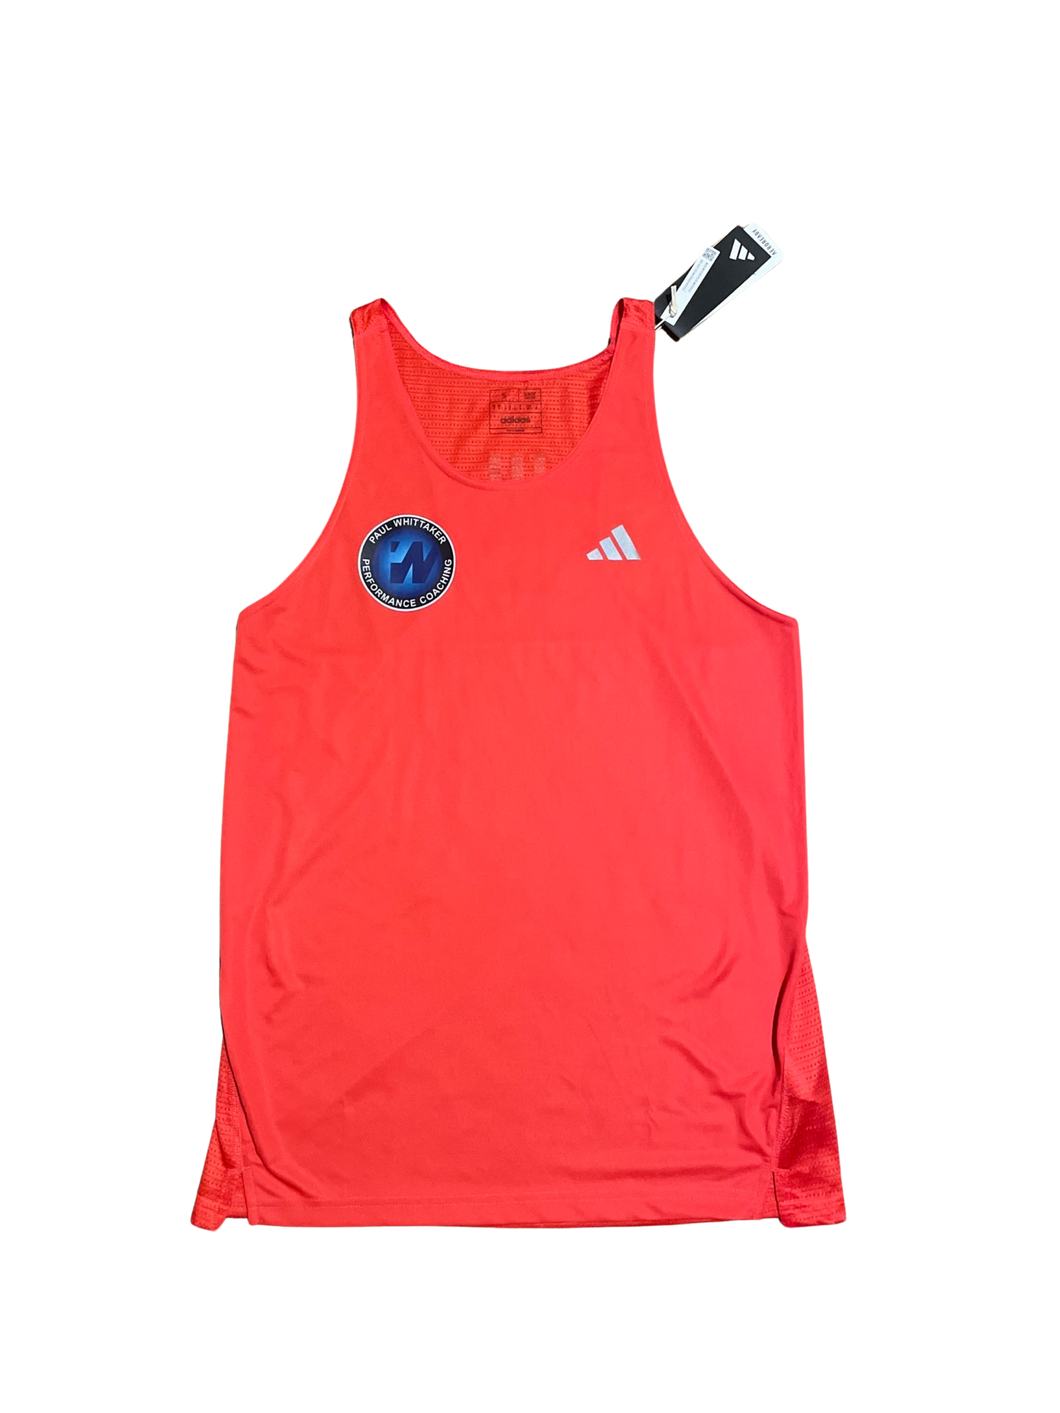 PW Performance Red Singlet (Mens)